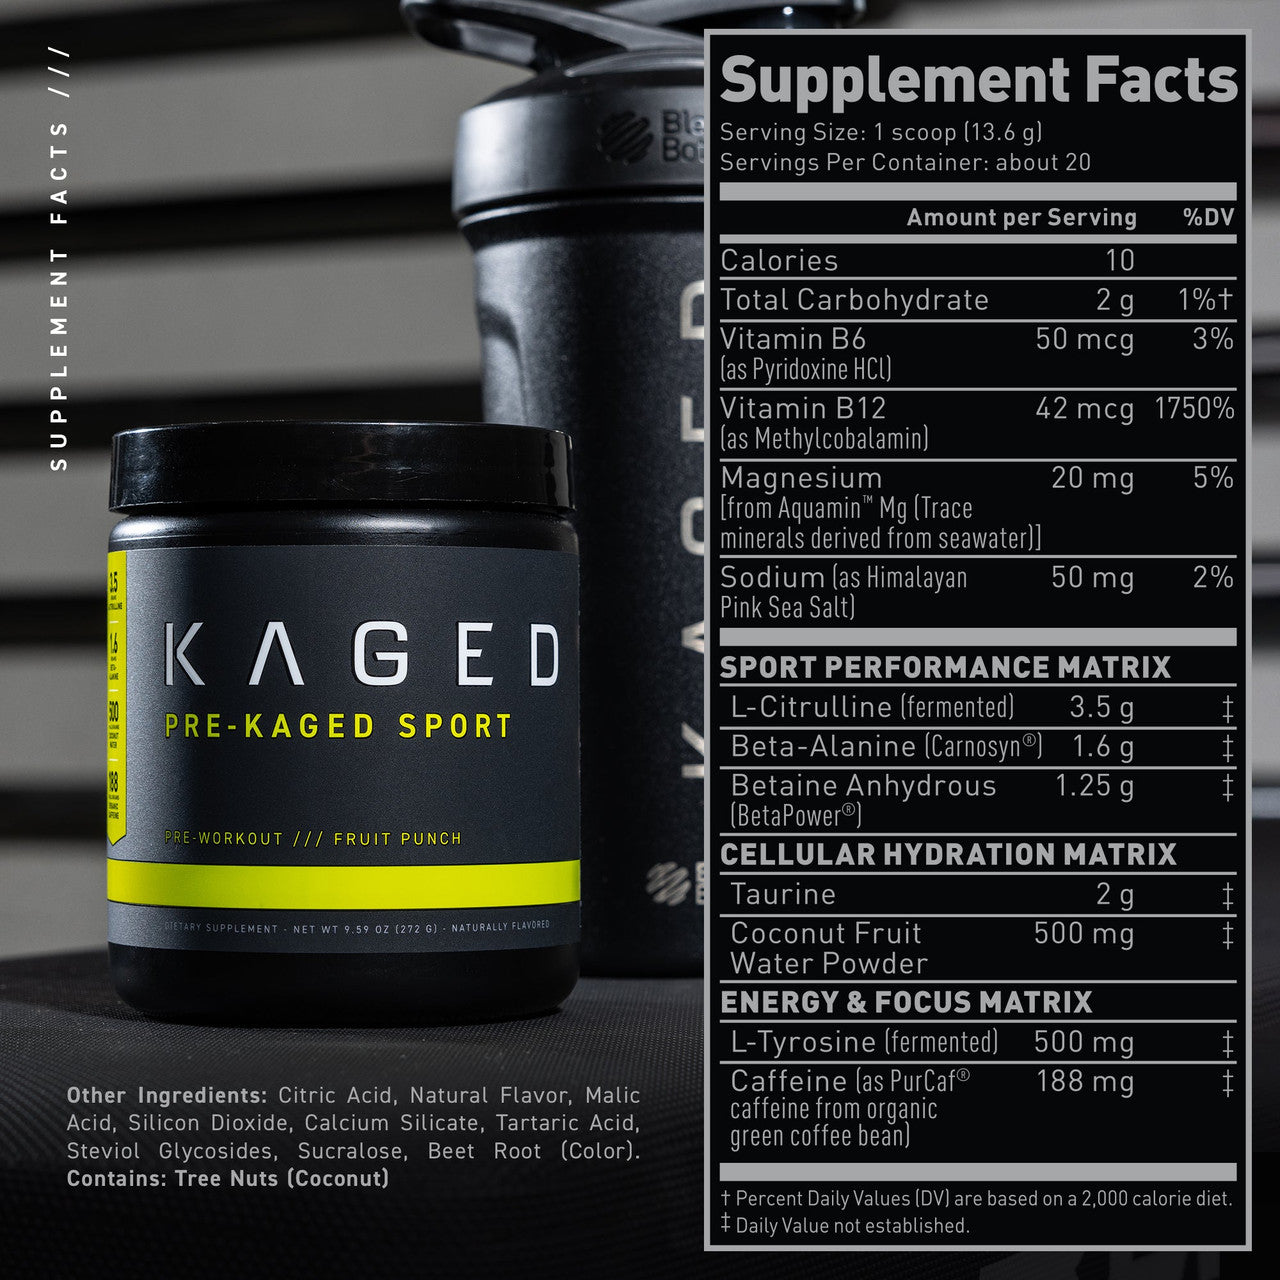 Kaged Muscle Pre-Kaged Sport Supplement Facts